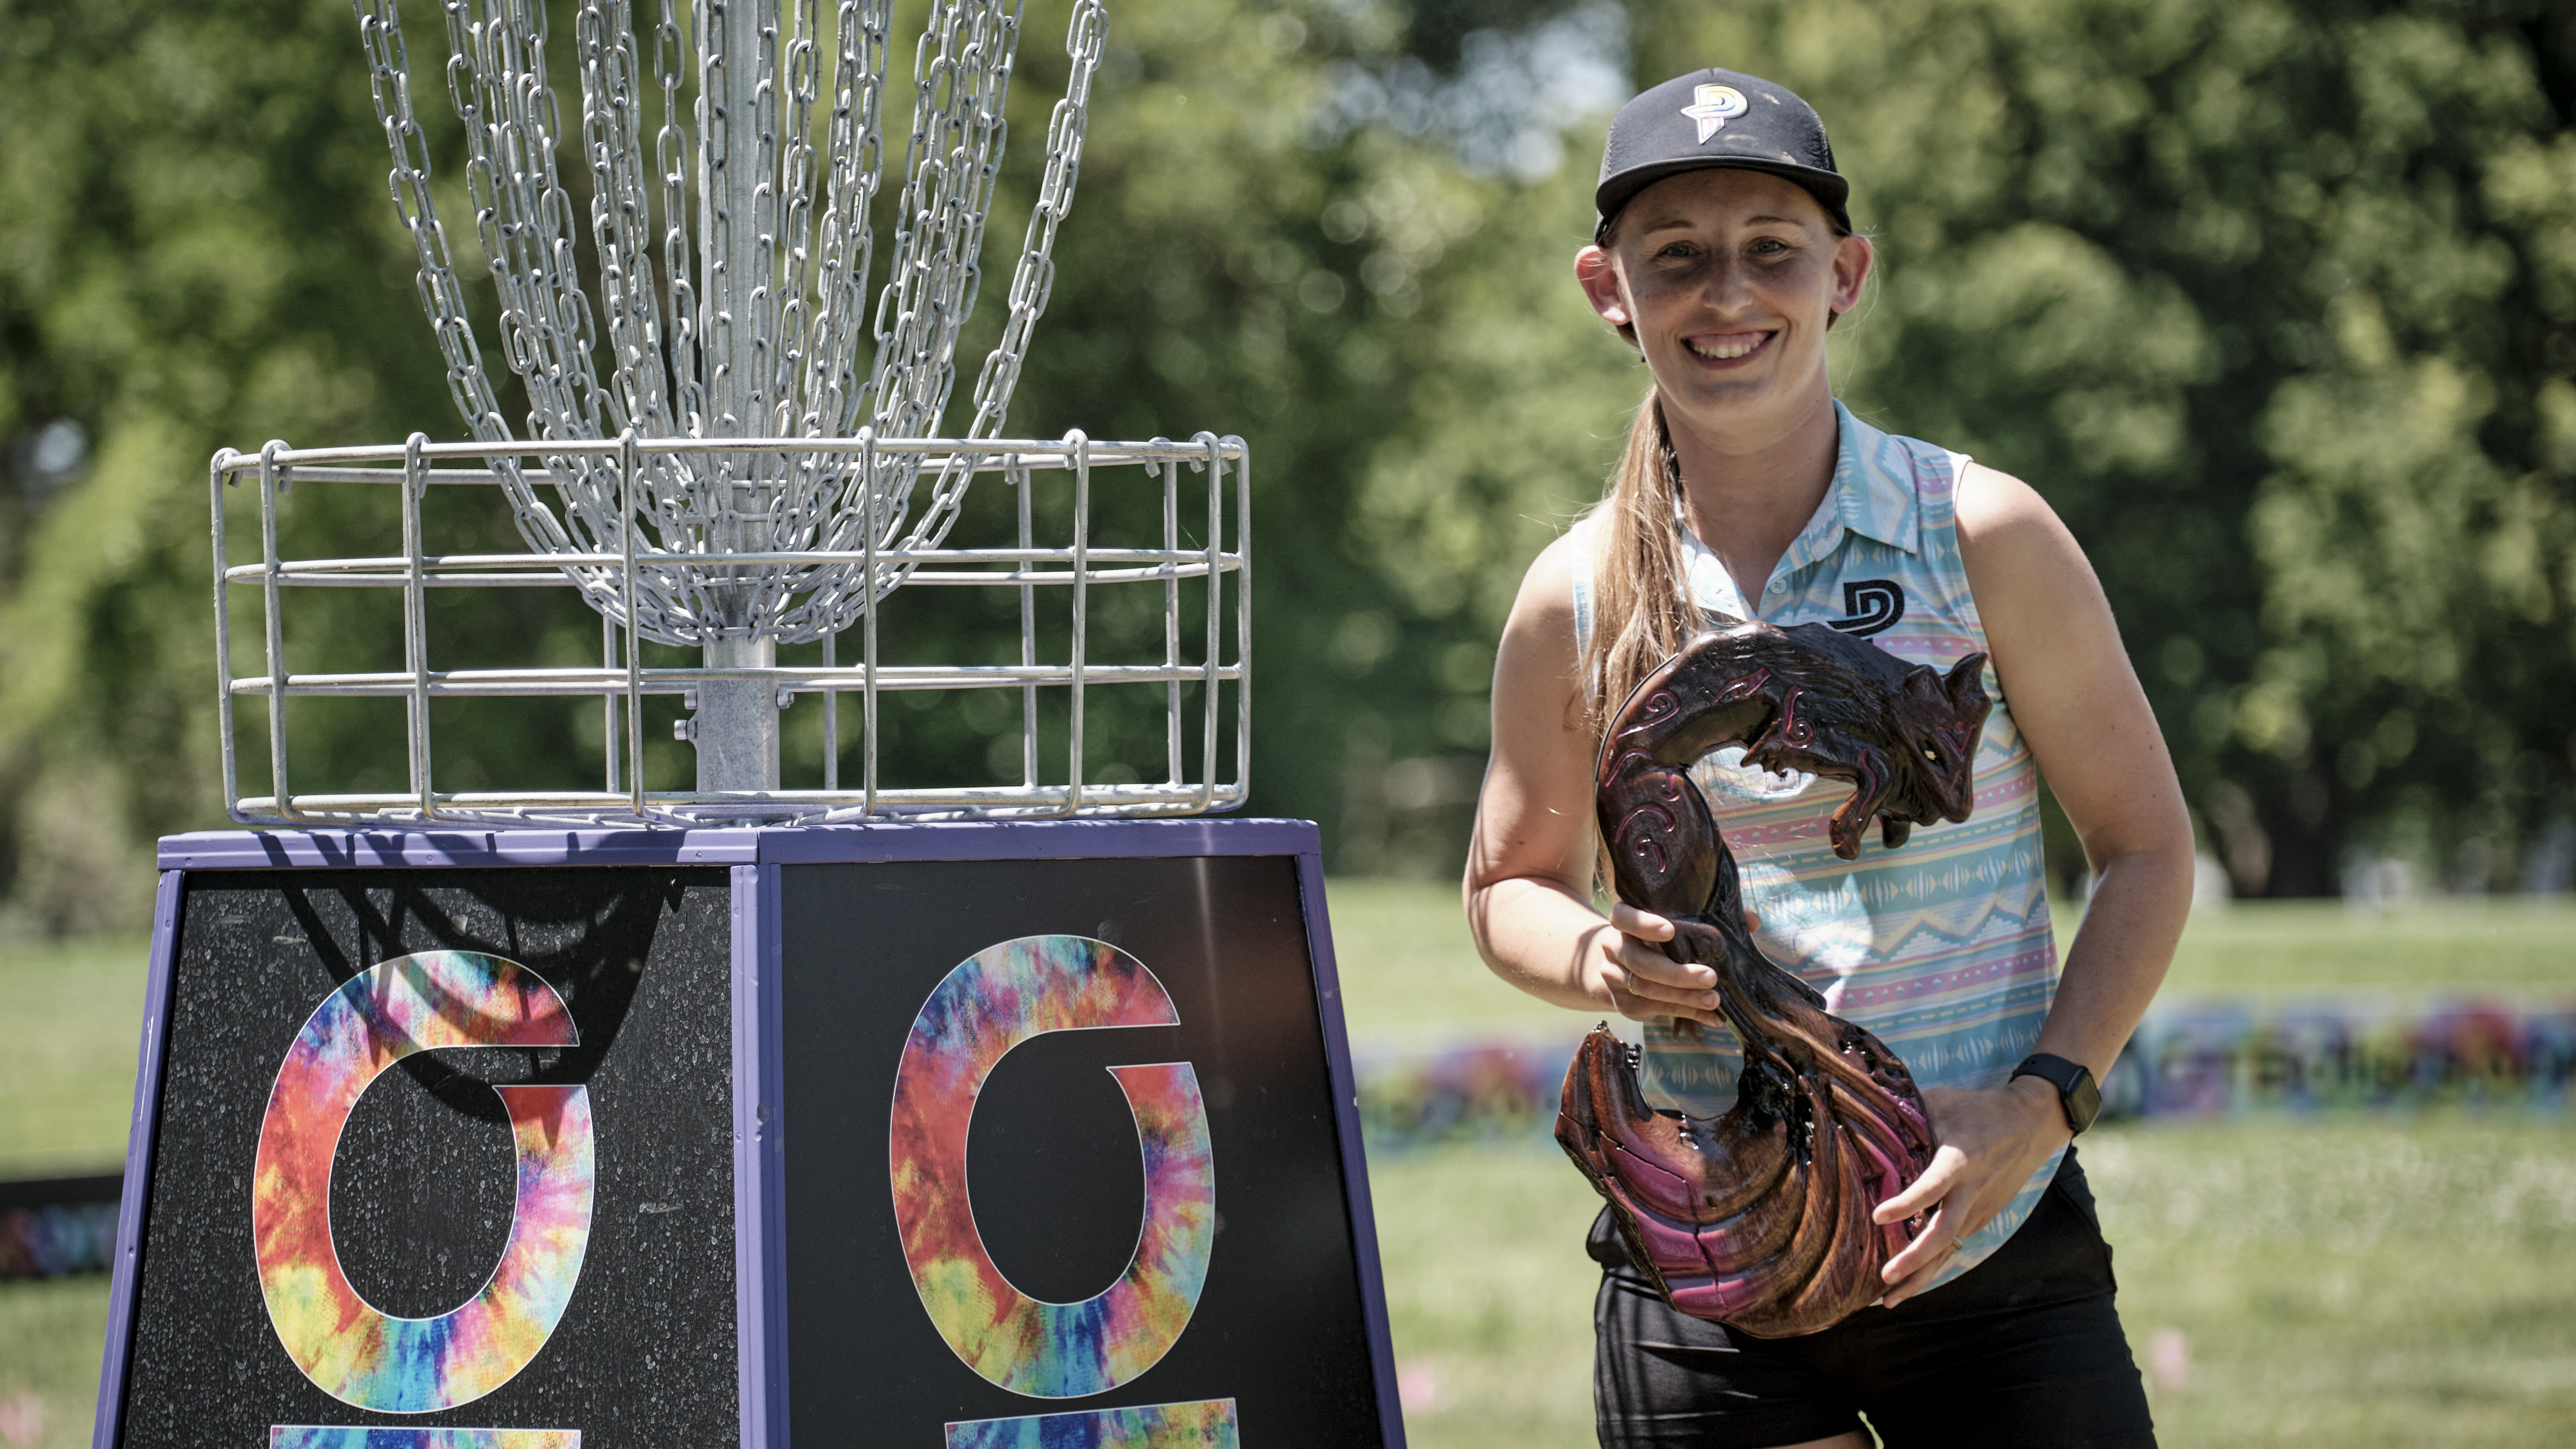 Pierce Rolls, Keith Triumphs in Stockton Professional Disc Golf Association picture